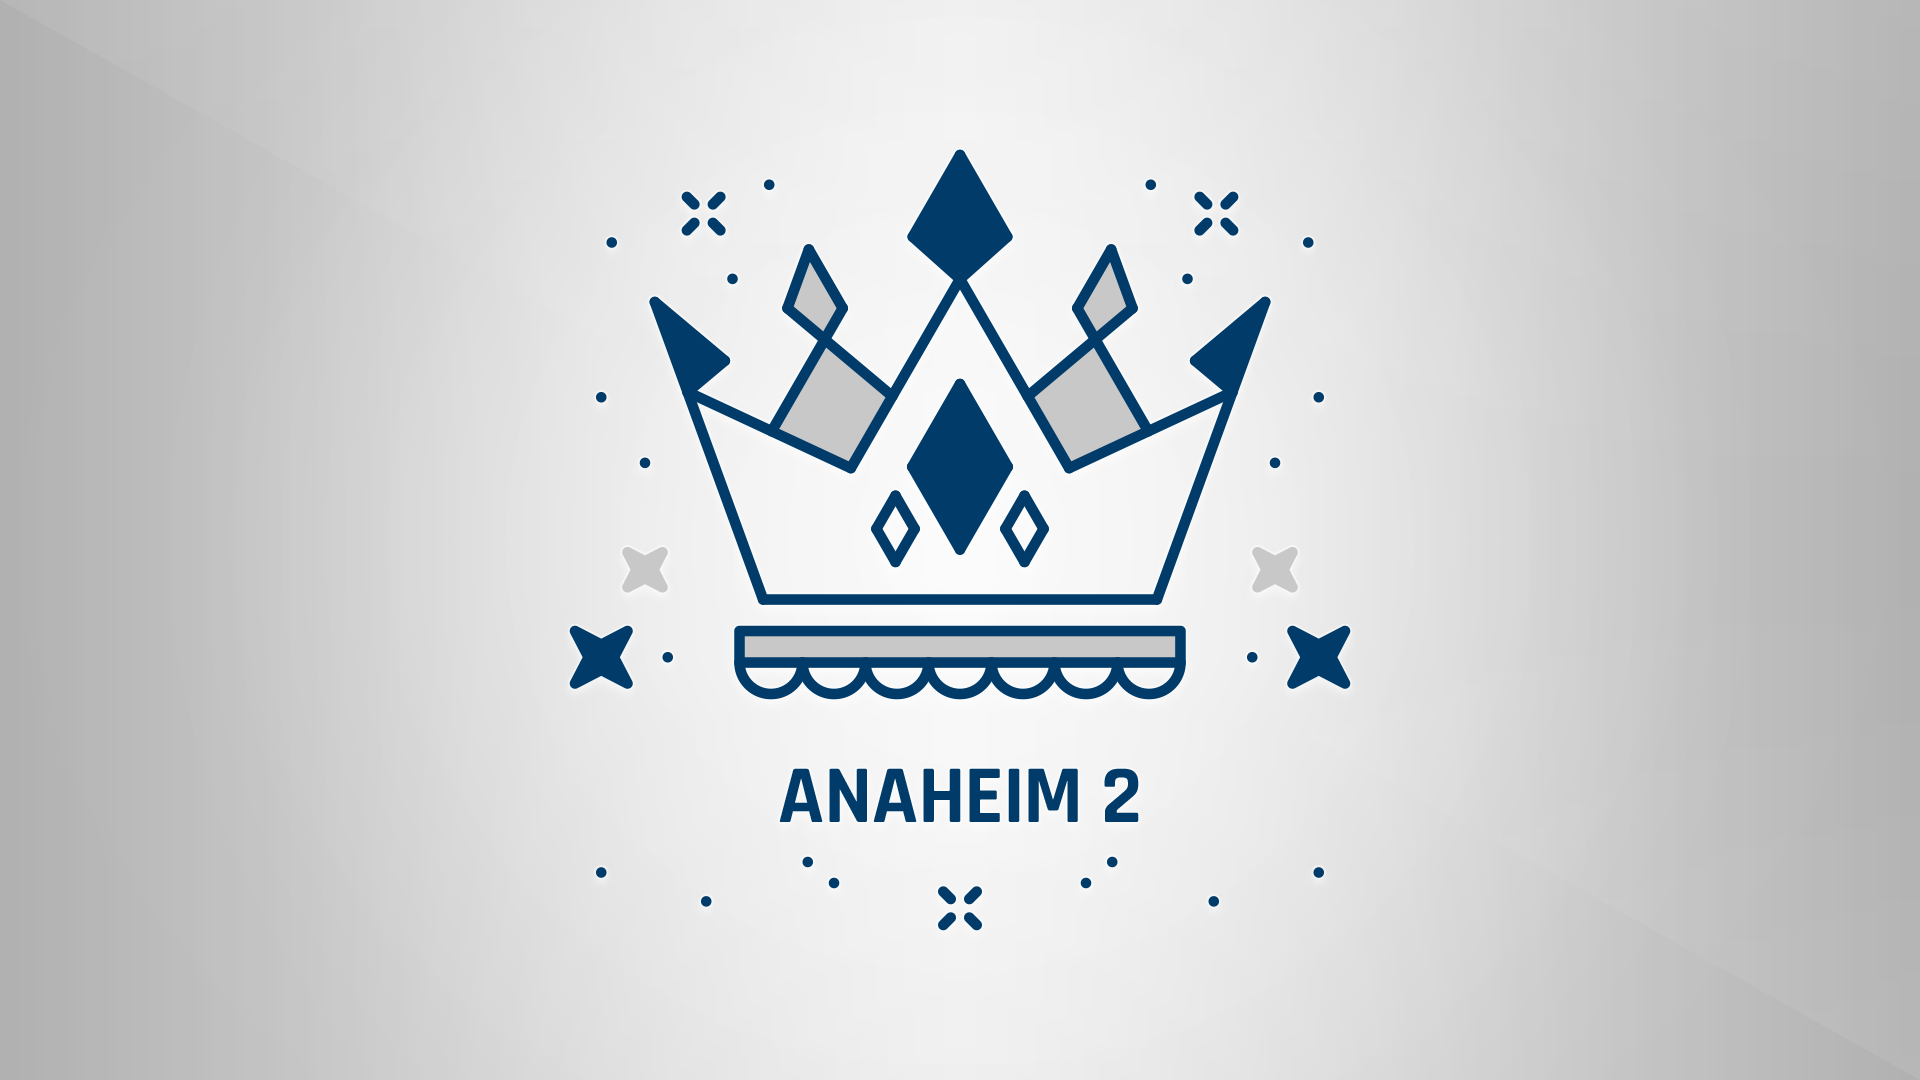 Icon for King of Anaheim 2